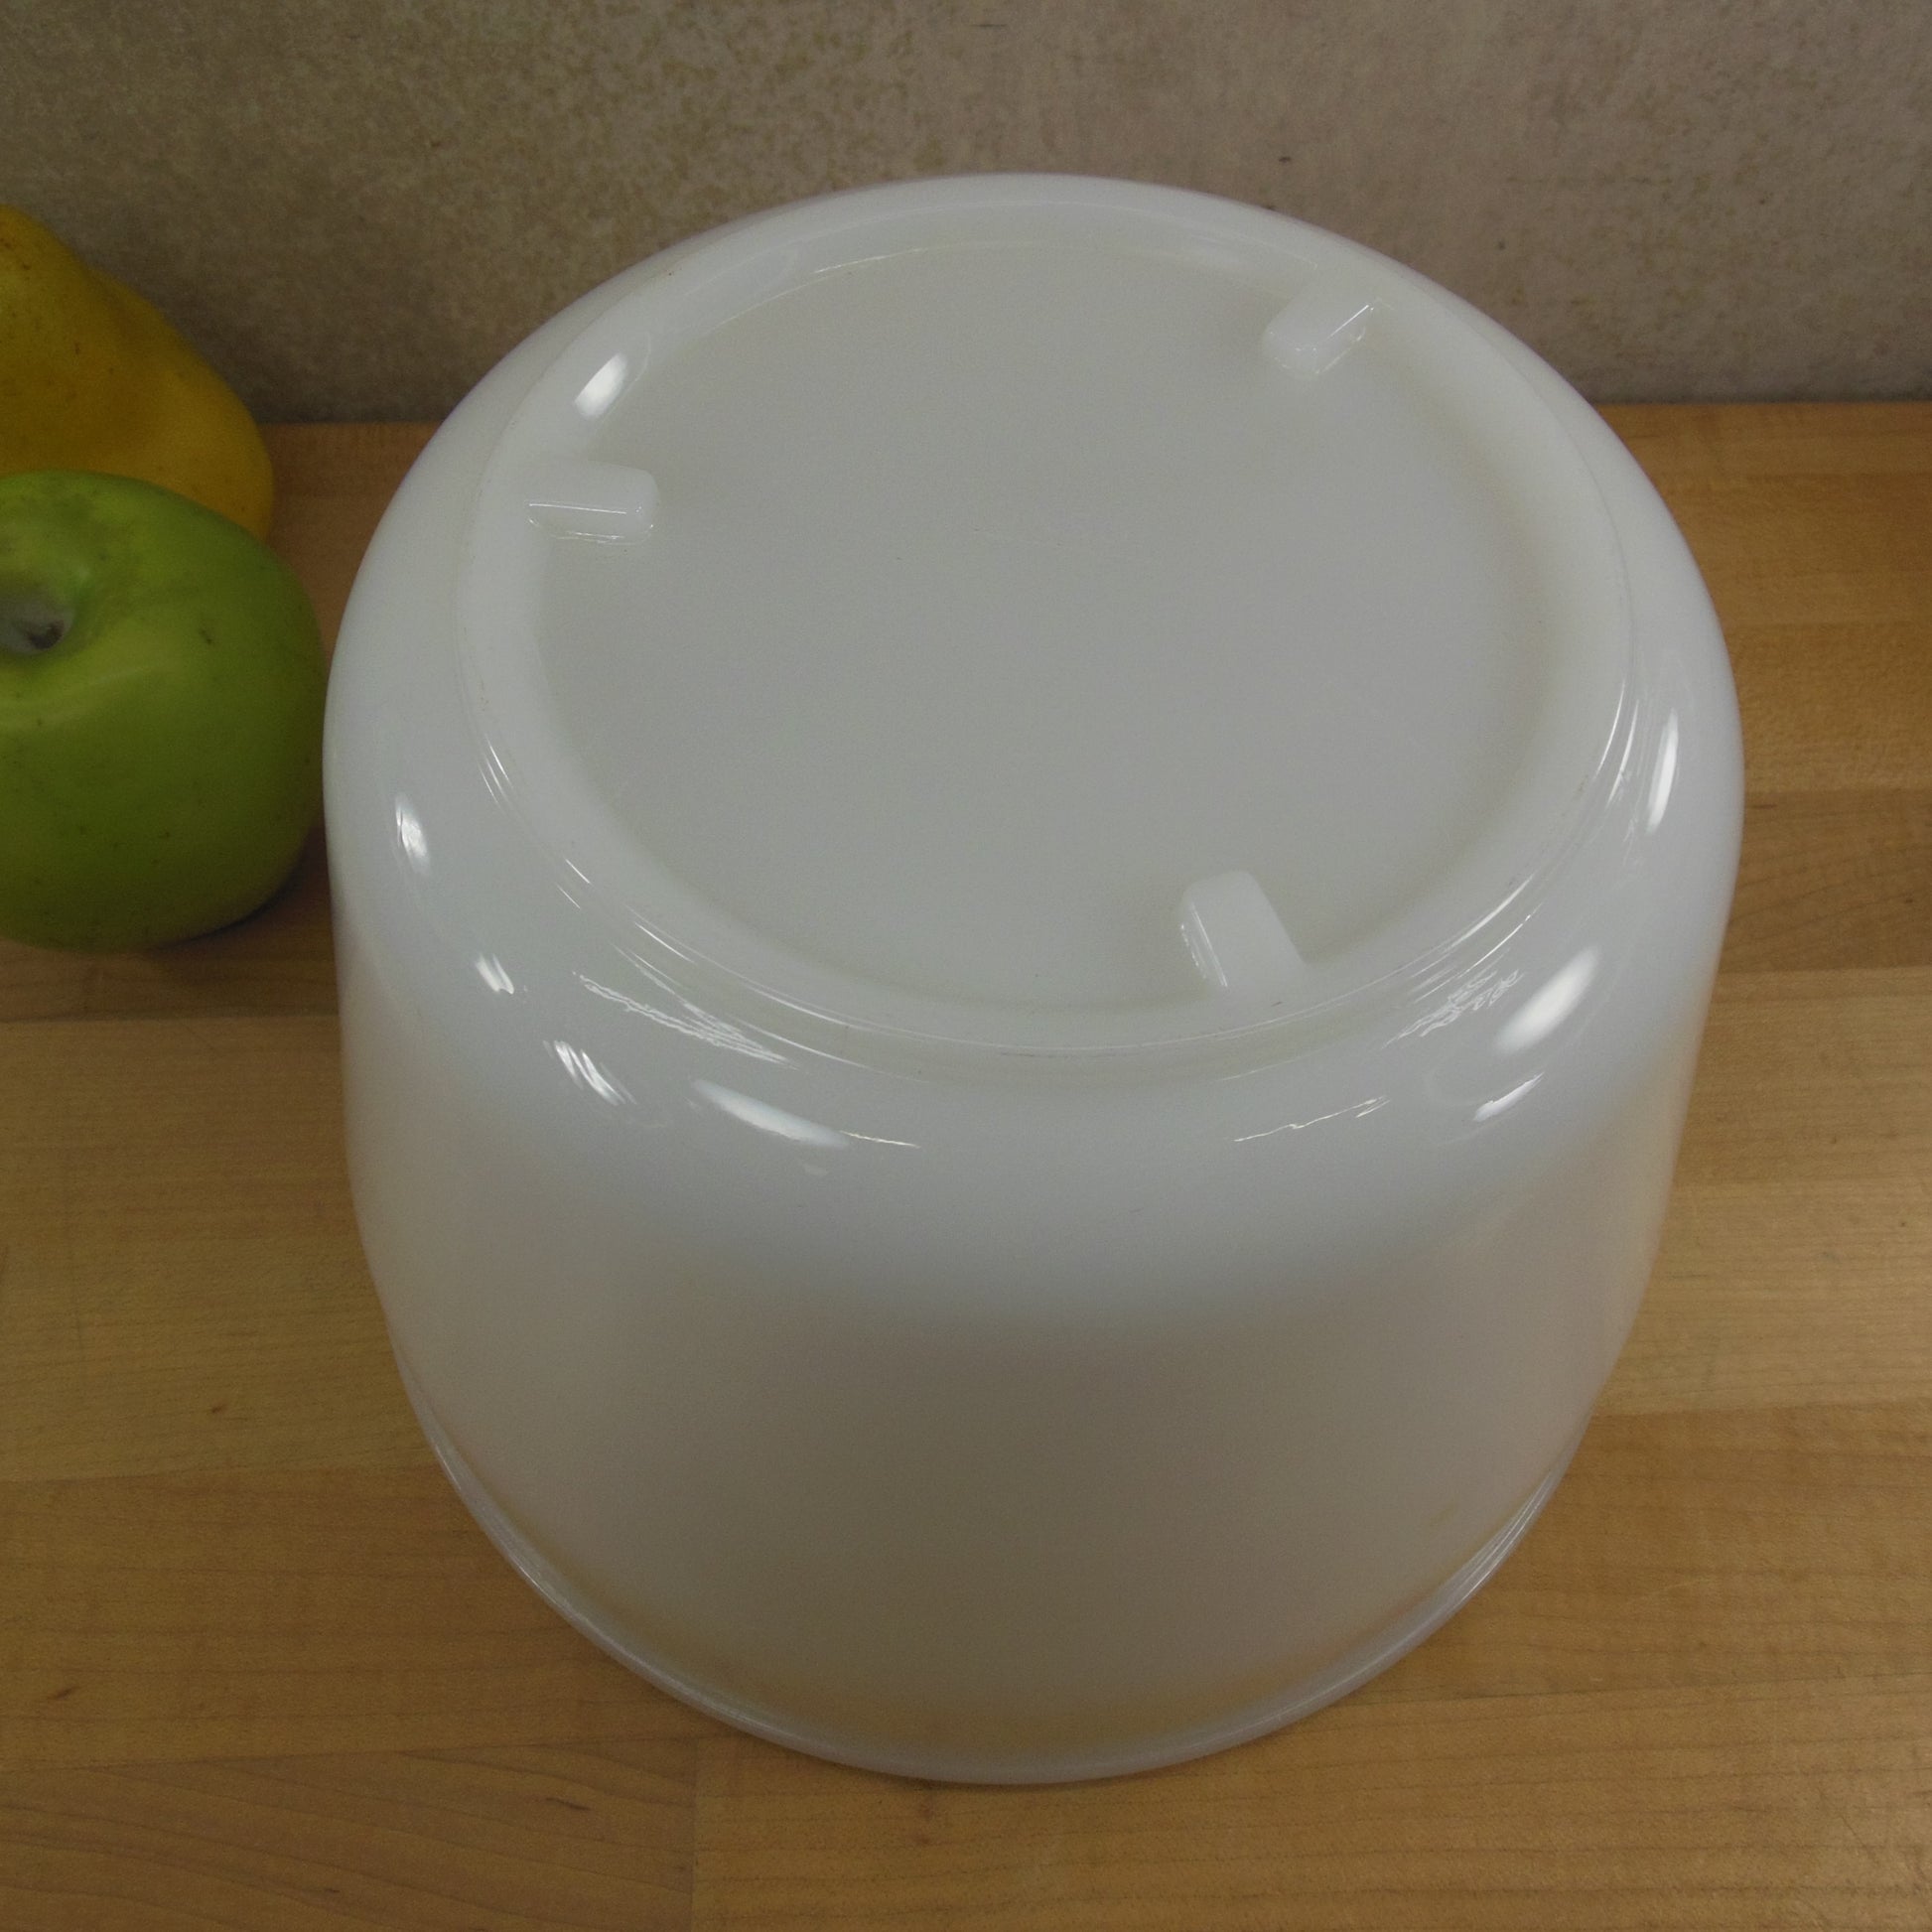 Ronson Foodmatic Mixer Mixing Bowl White Glass - Large used